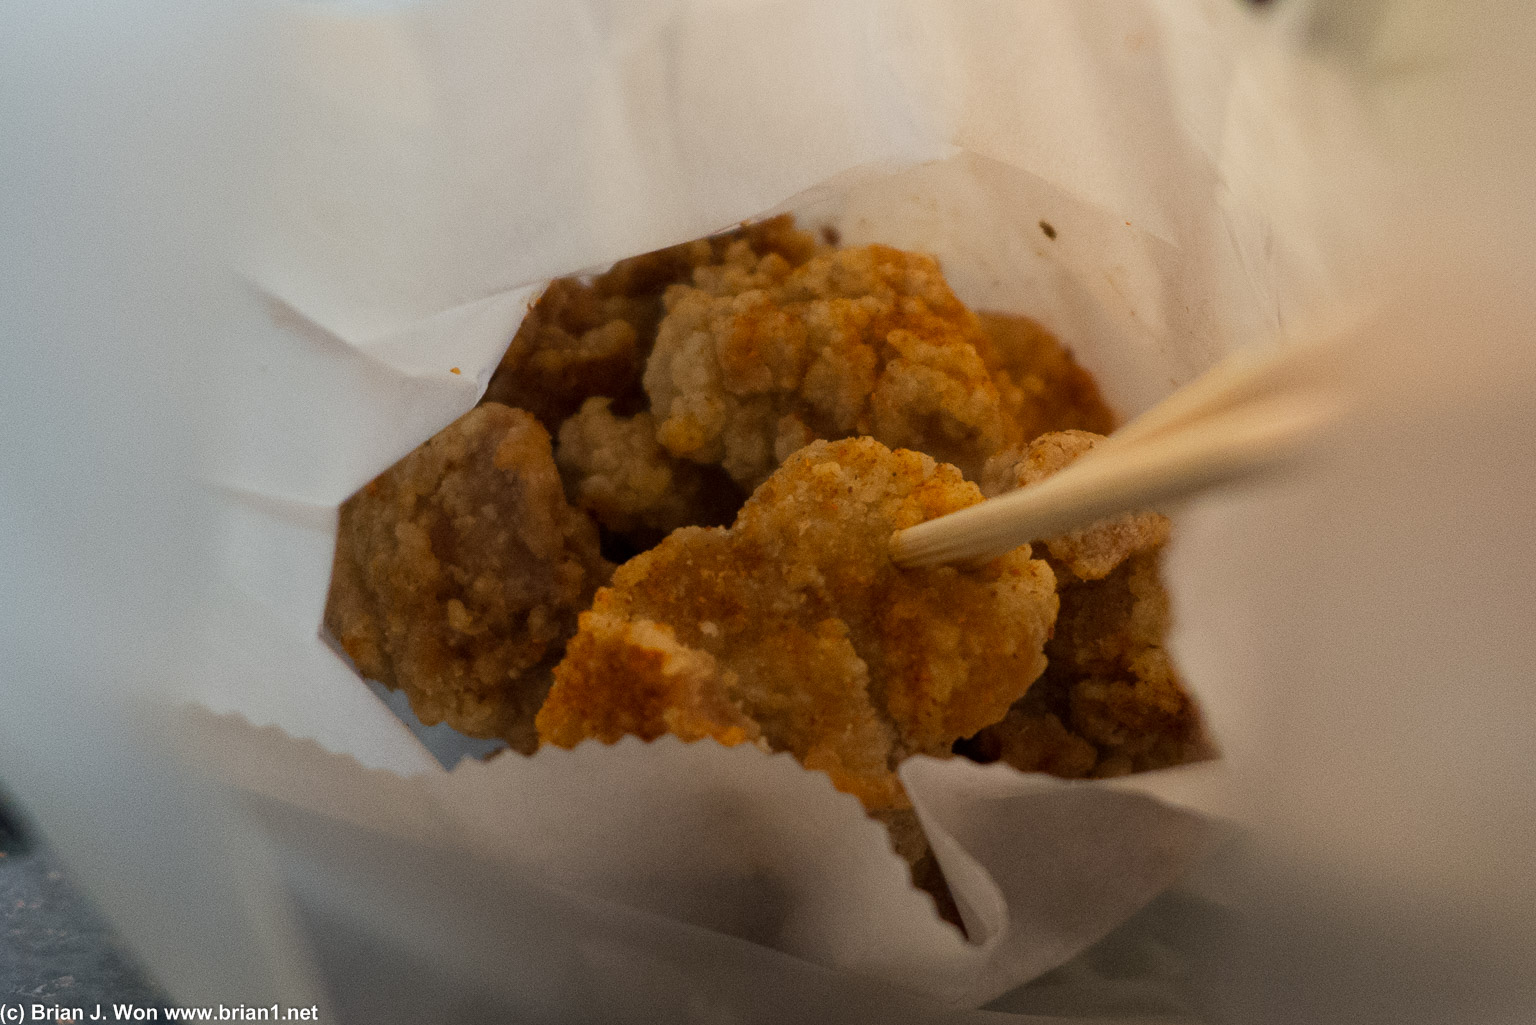 Snack time! Extra spicy popcorn chicken at Volcano Tea.